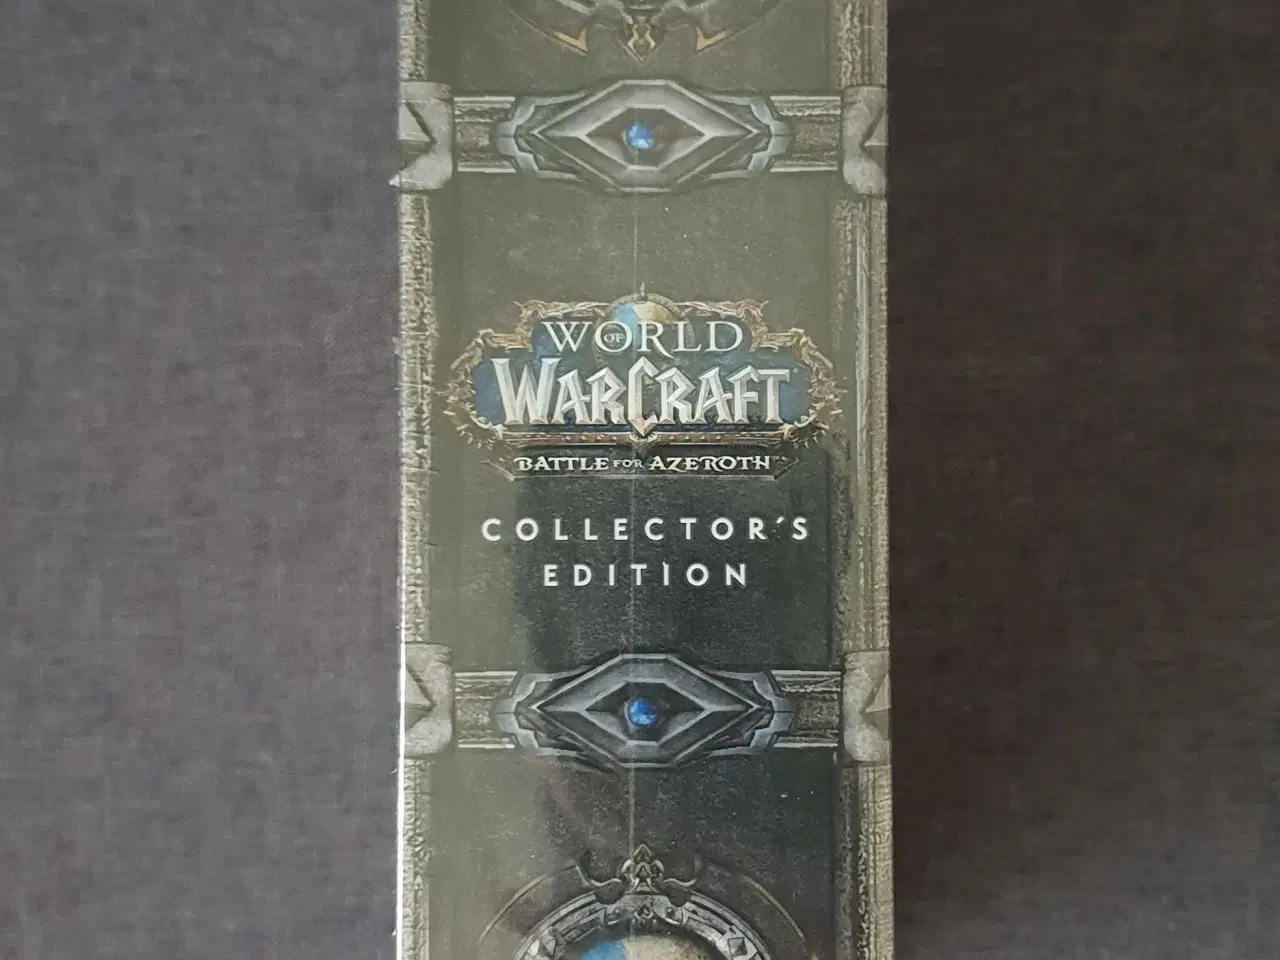 Billede 3 - World of Warcraft Battle: for Azeroth Collectors E